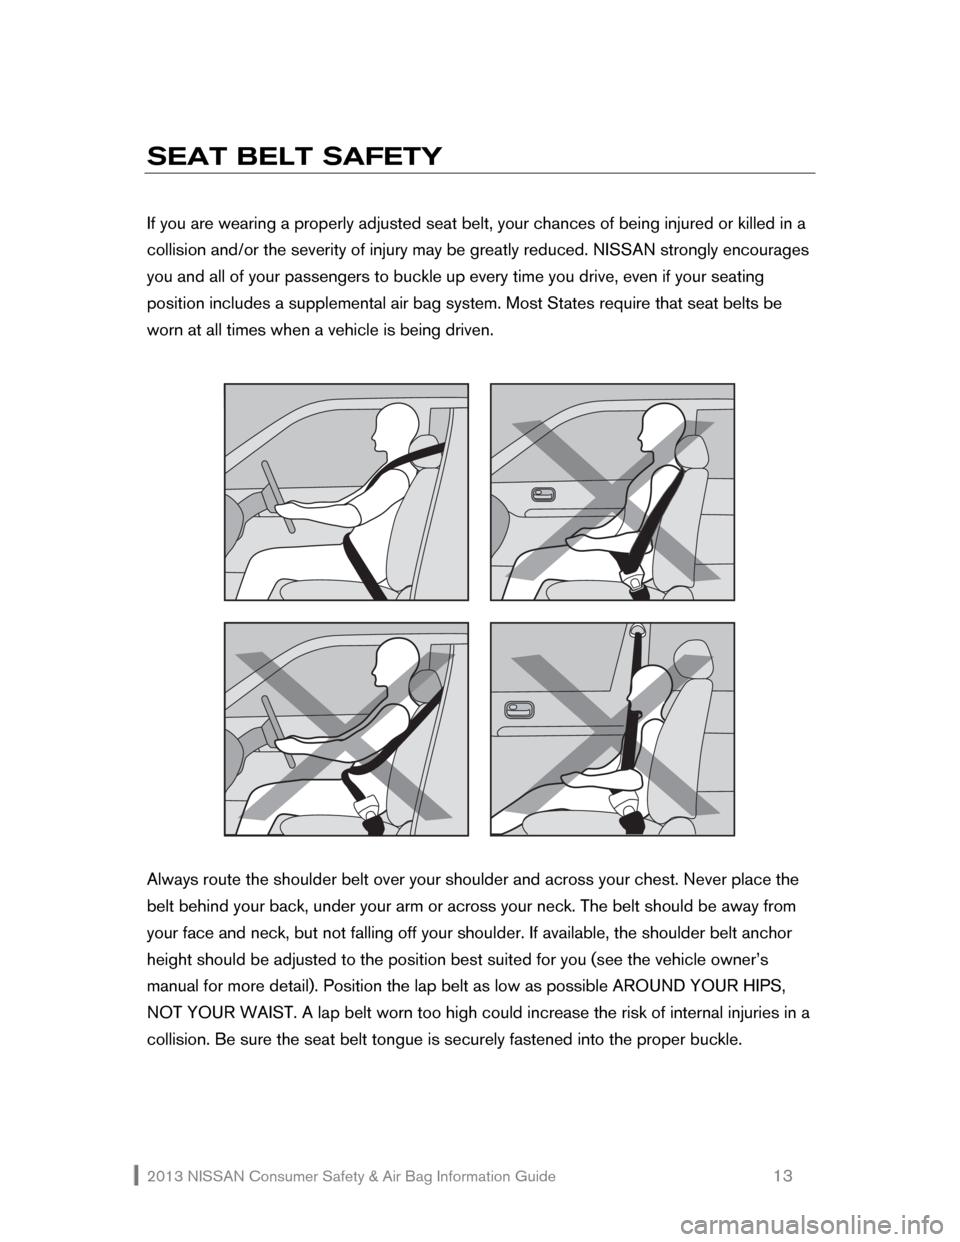 NISSAN TITAN 2013 1.G Consumer Safety Air Bag Information Guide 2013 NISSAN Consumer Safety & Air Bag Information Guide                                                   13 
SEAT BELT SAFETY 
 
If you are wearing a properly adjusted seat belt, your chances of bein